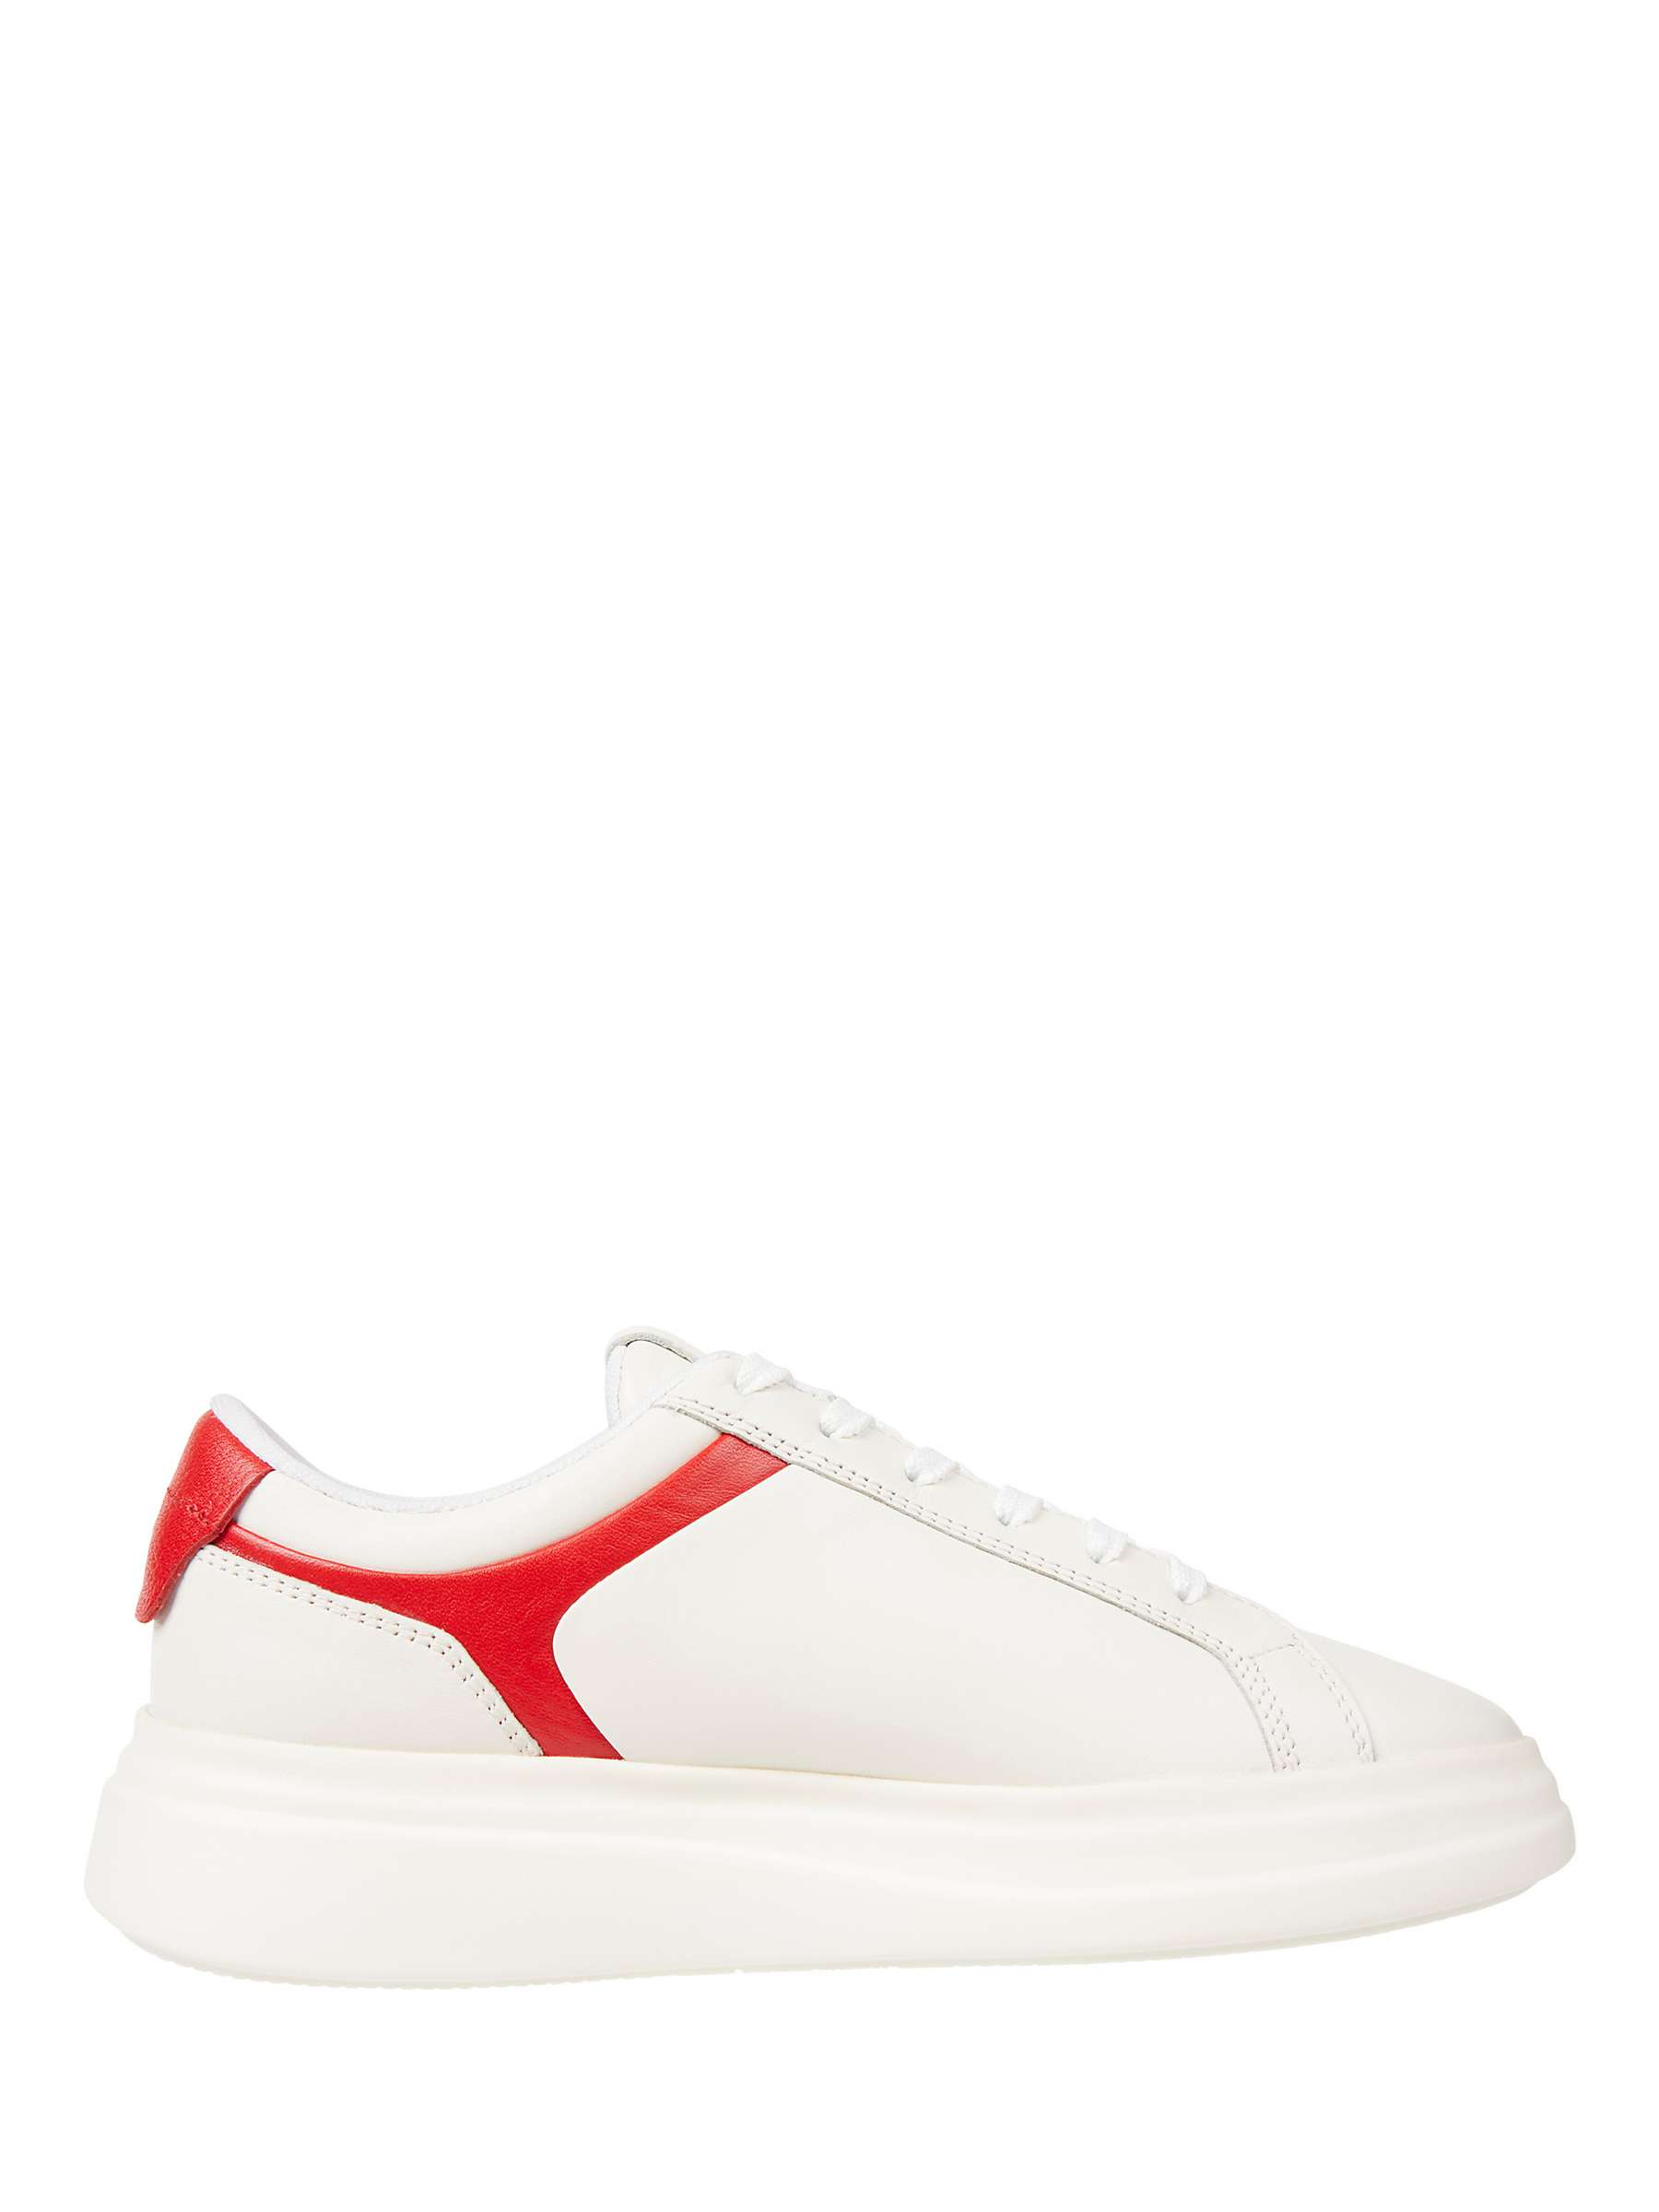 Buy Tommy Hilfiger Leather Court Trainers, Ecru/Fierce Red Online at johnlewis.com